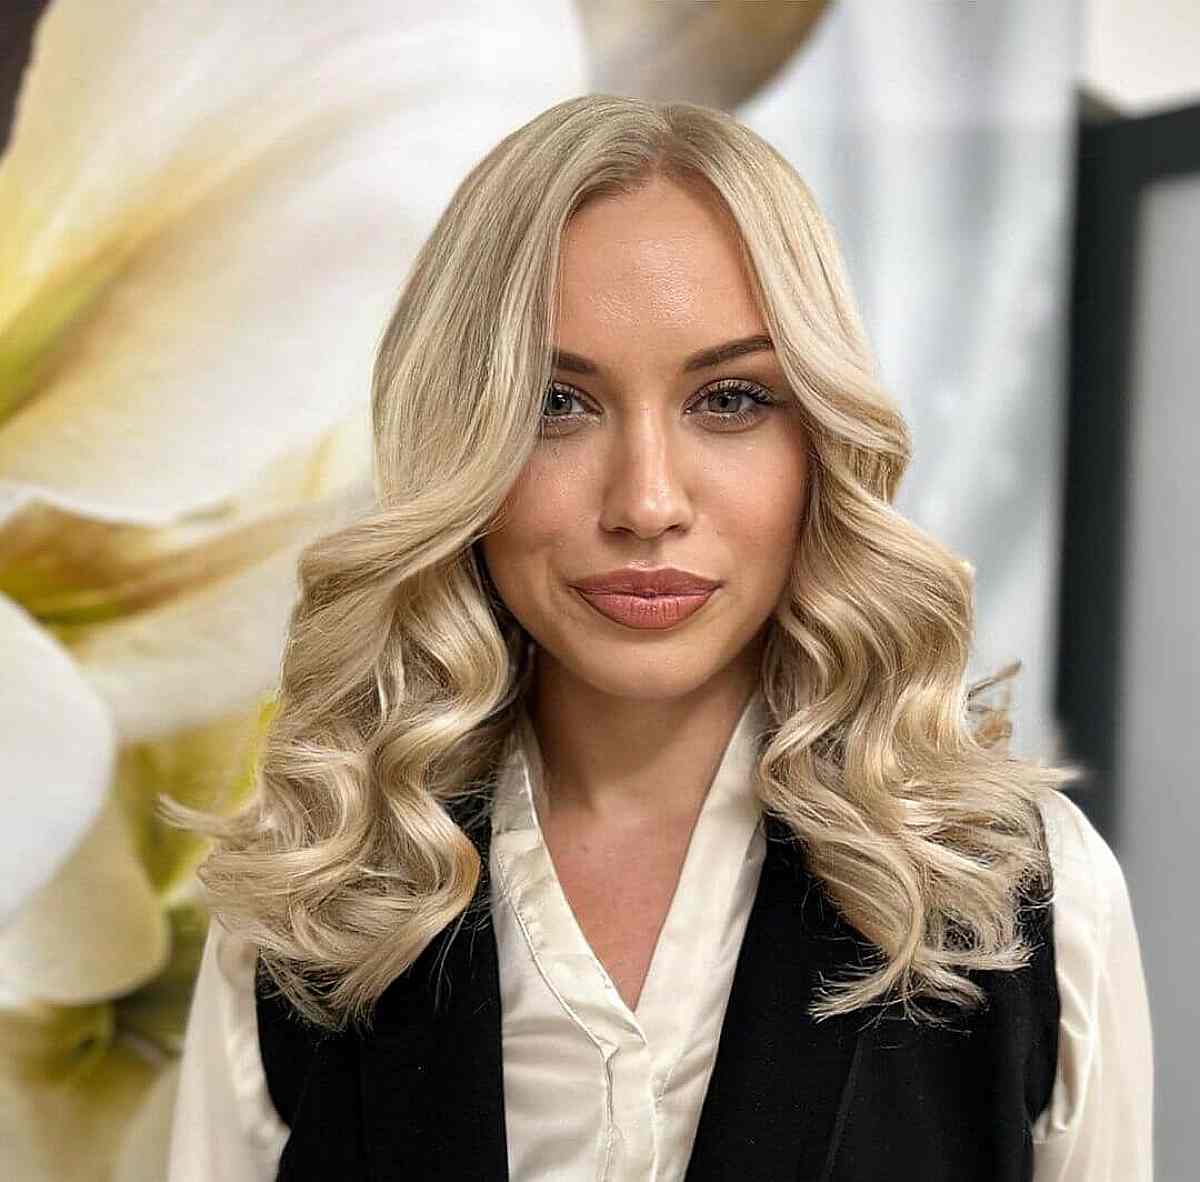 Chic Blonde Hair with Loose Wavy Curled Ends